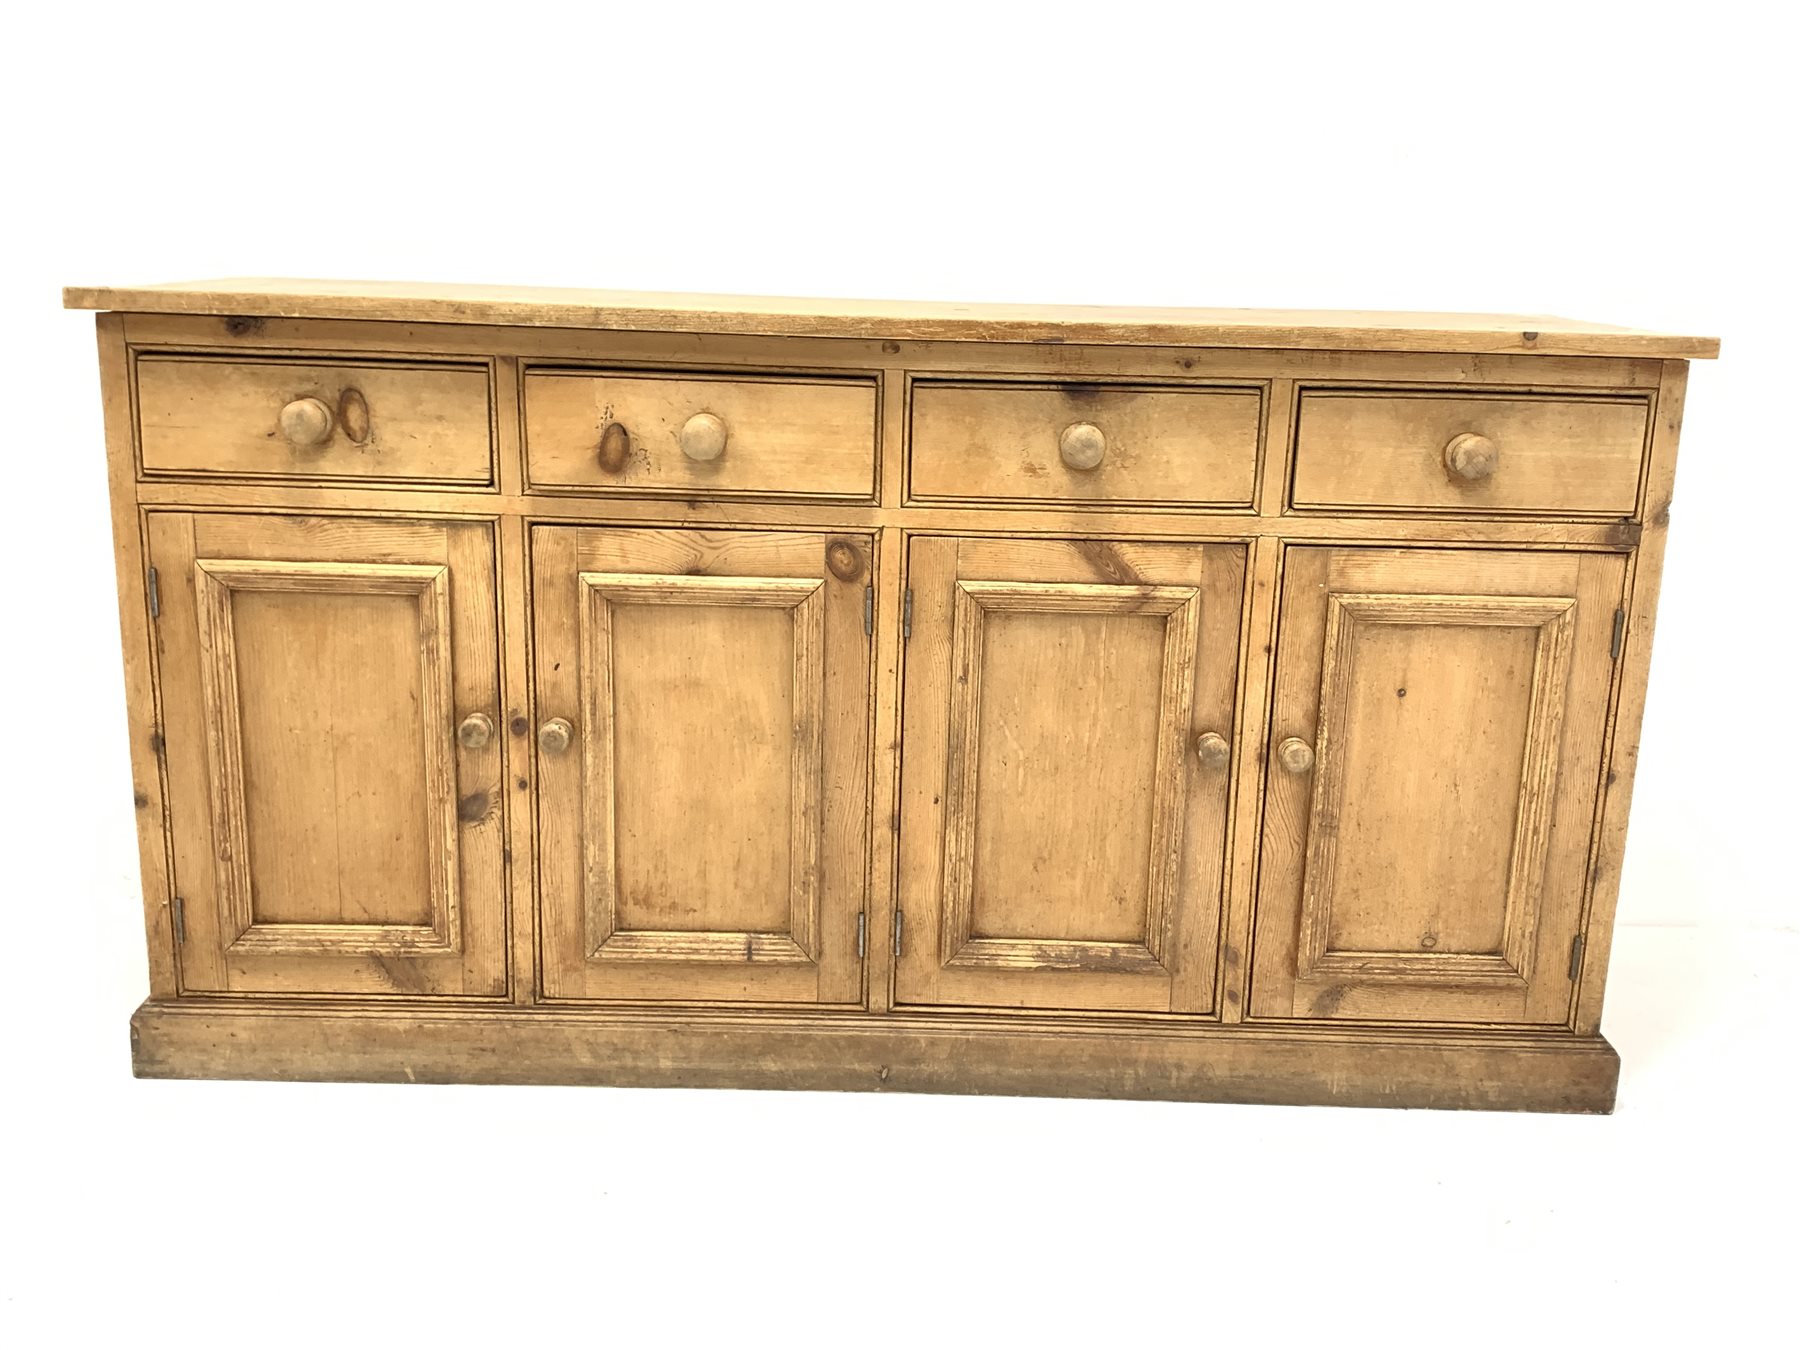 Victorian solid pine dresser base with four drawers over four cupboards, plinth base, W169cm, H89cm - Image 2 of 3